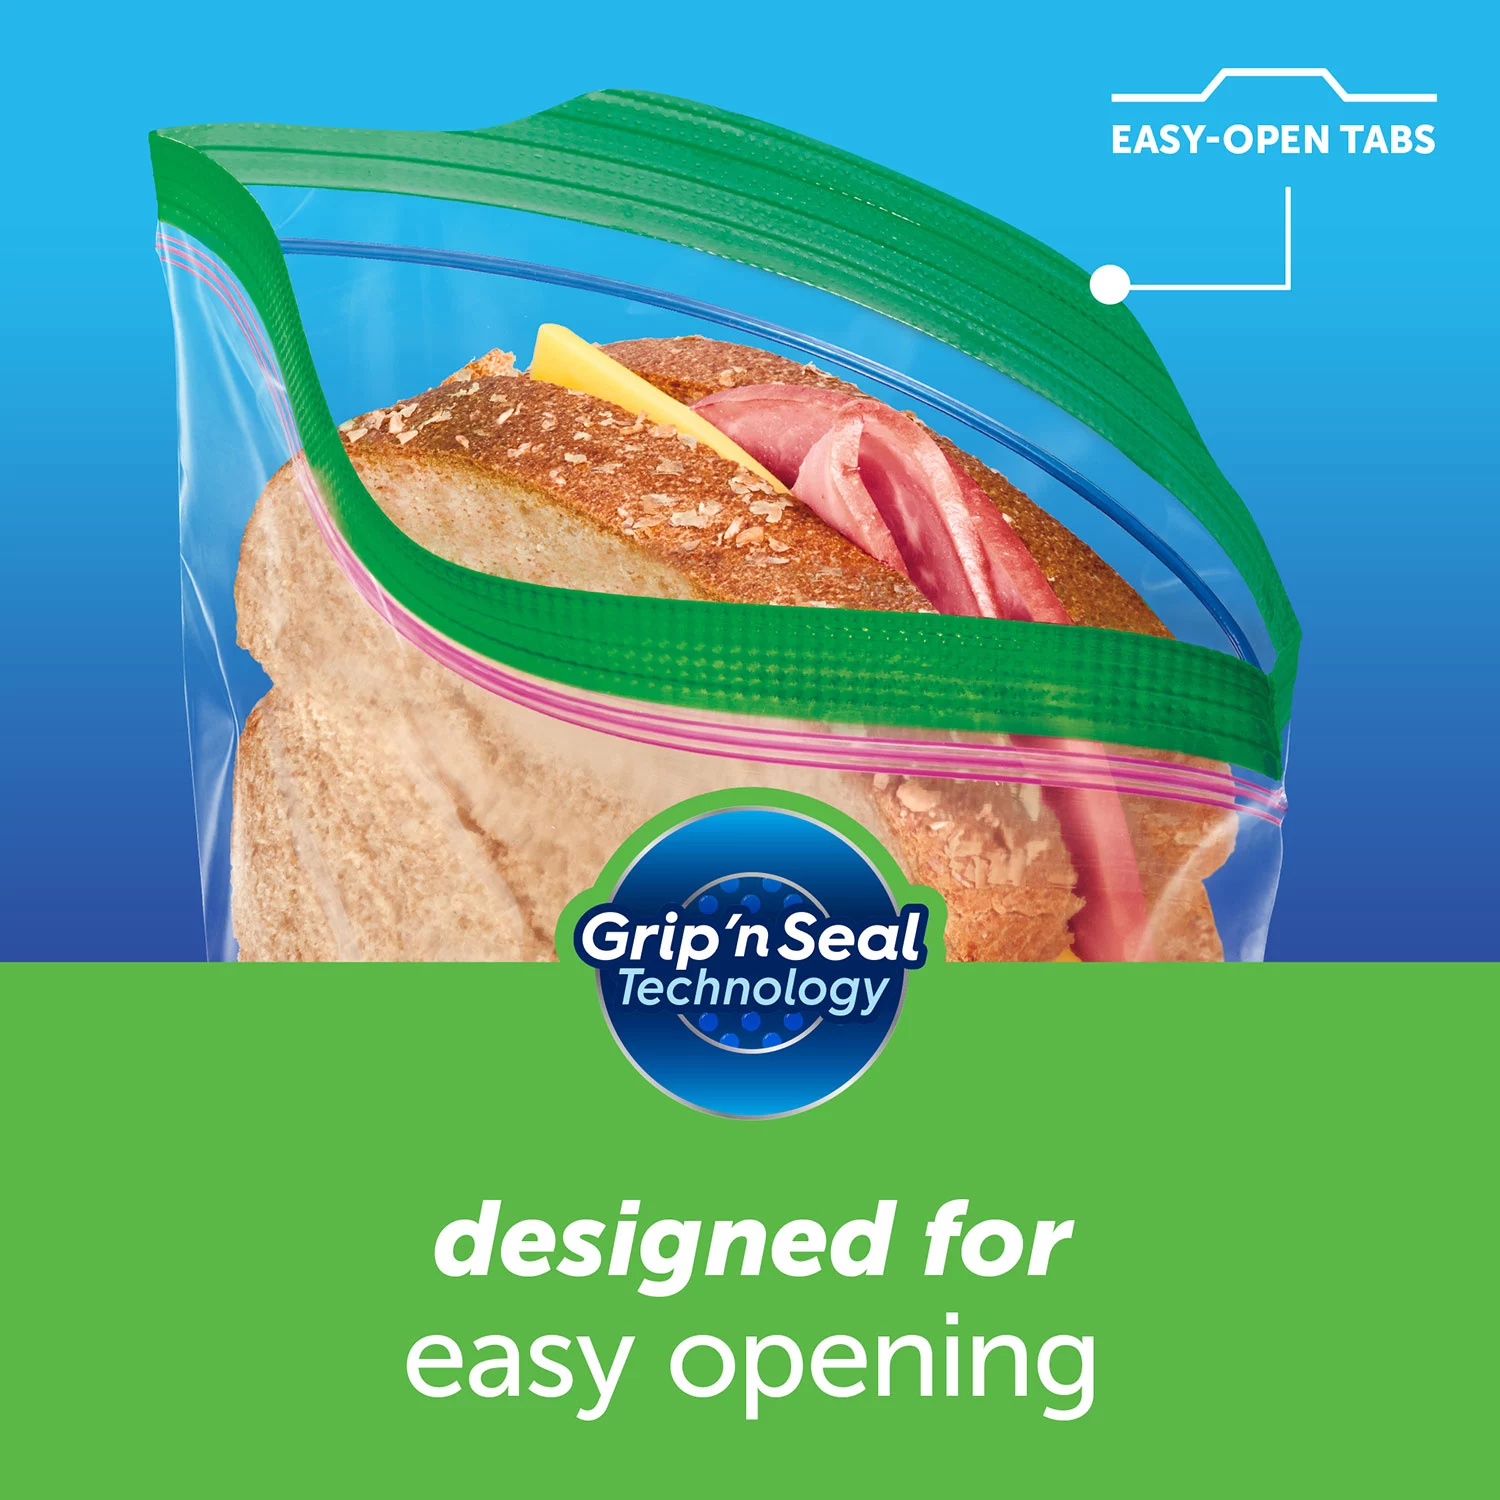 https://fornaxmall.com/wp-content/uploads/2022/12/Buy-from-Fornaxmall.com-Ziploc-Easy-Open-Tabs-Sandwich-Bags-580-145-Count-Pack-of-4-Total-580-4.webp